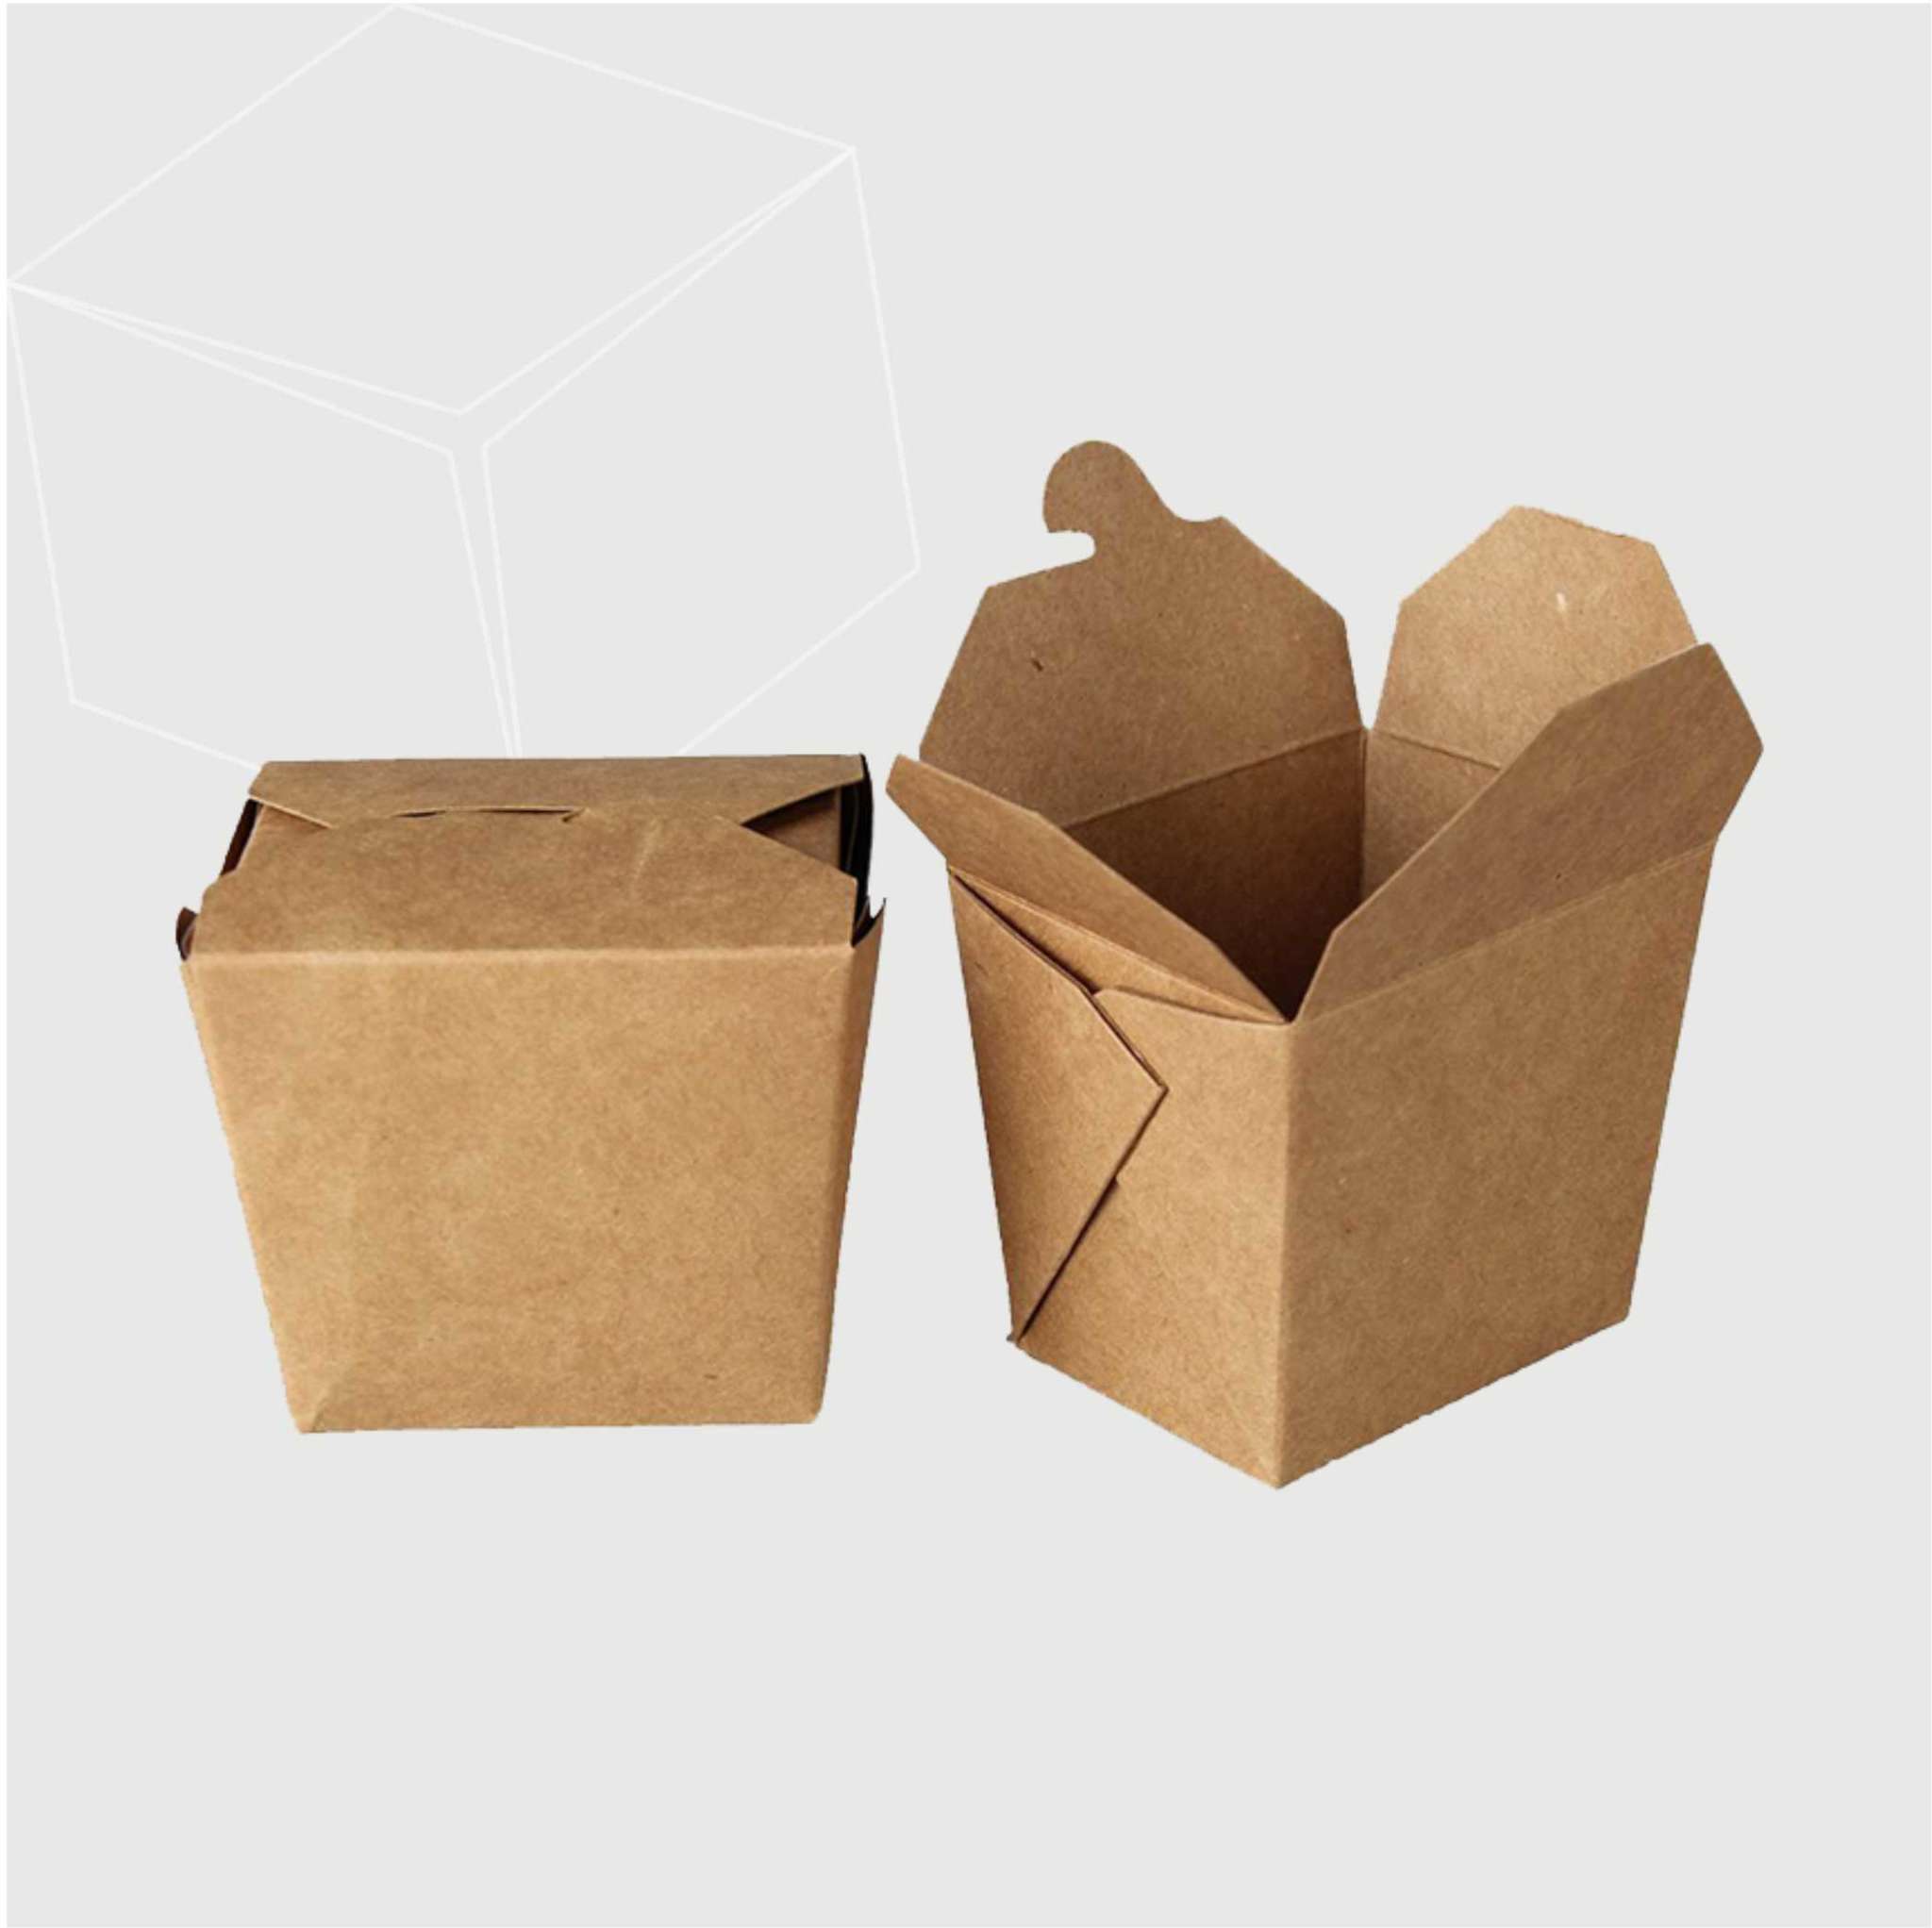 Customized Indian Food Takeout Boxes